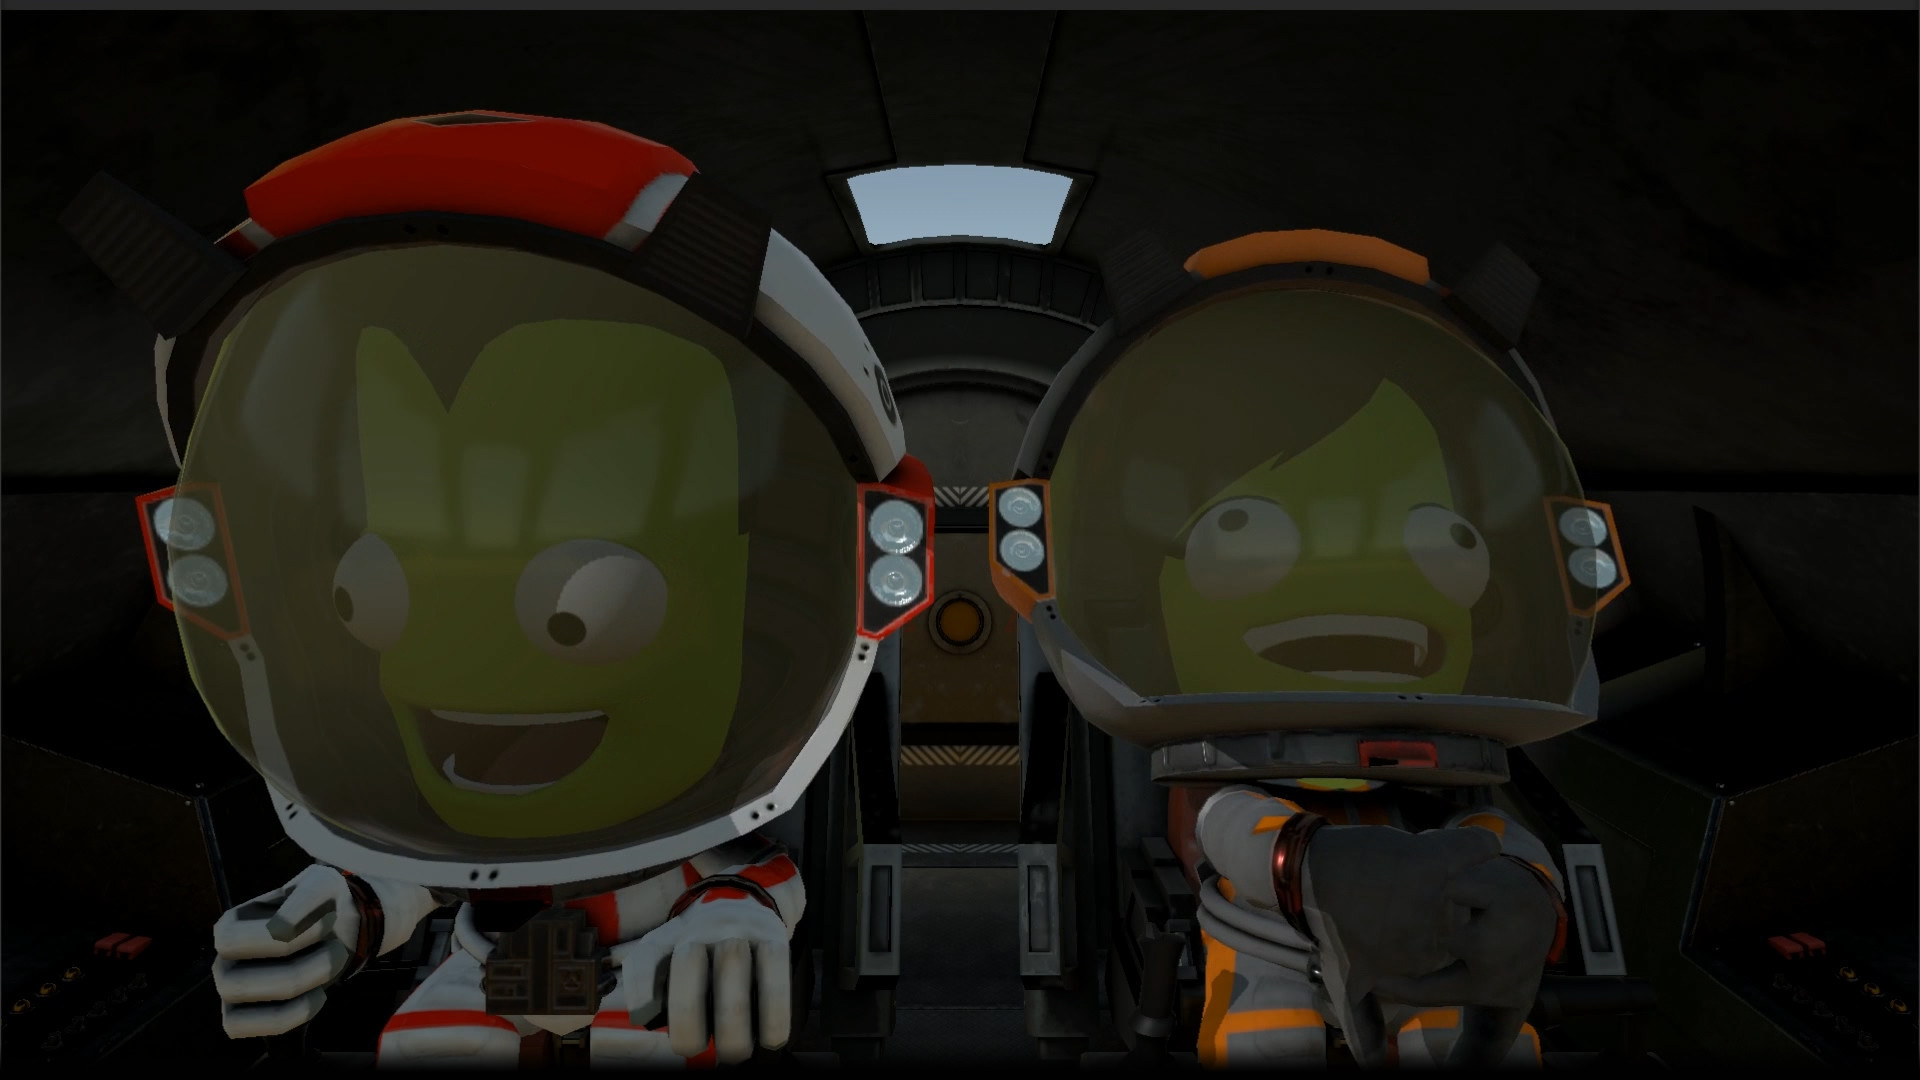 Today at GR Live we fly to the Moon with Kerbal Space Program 2